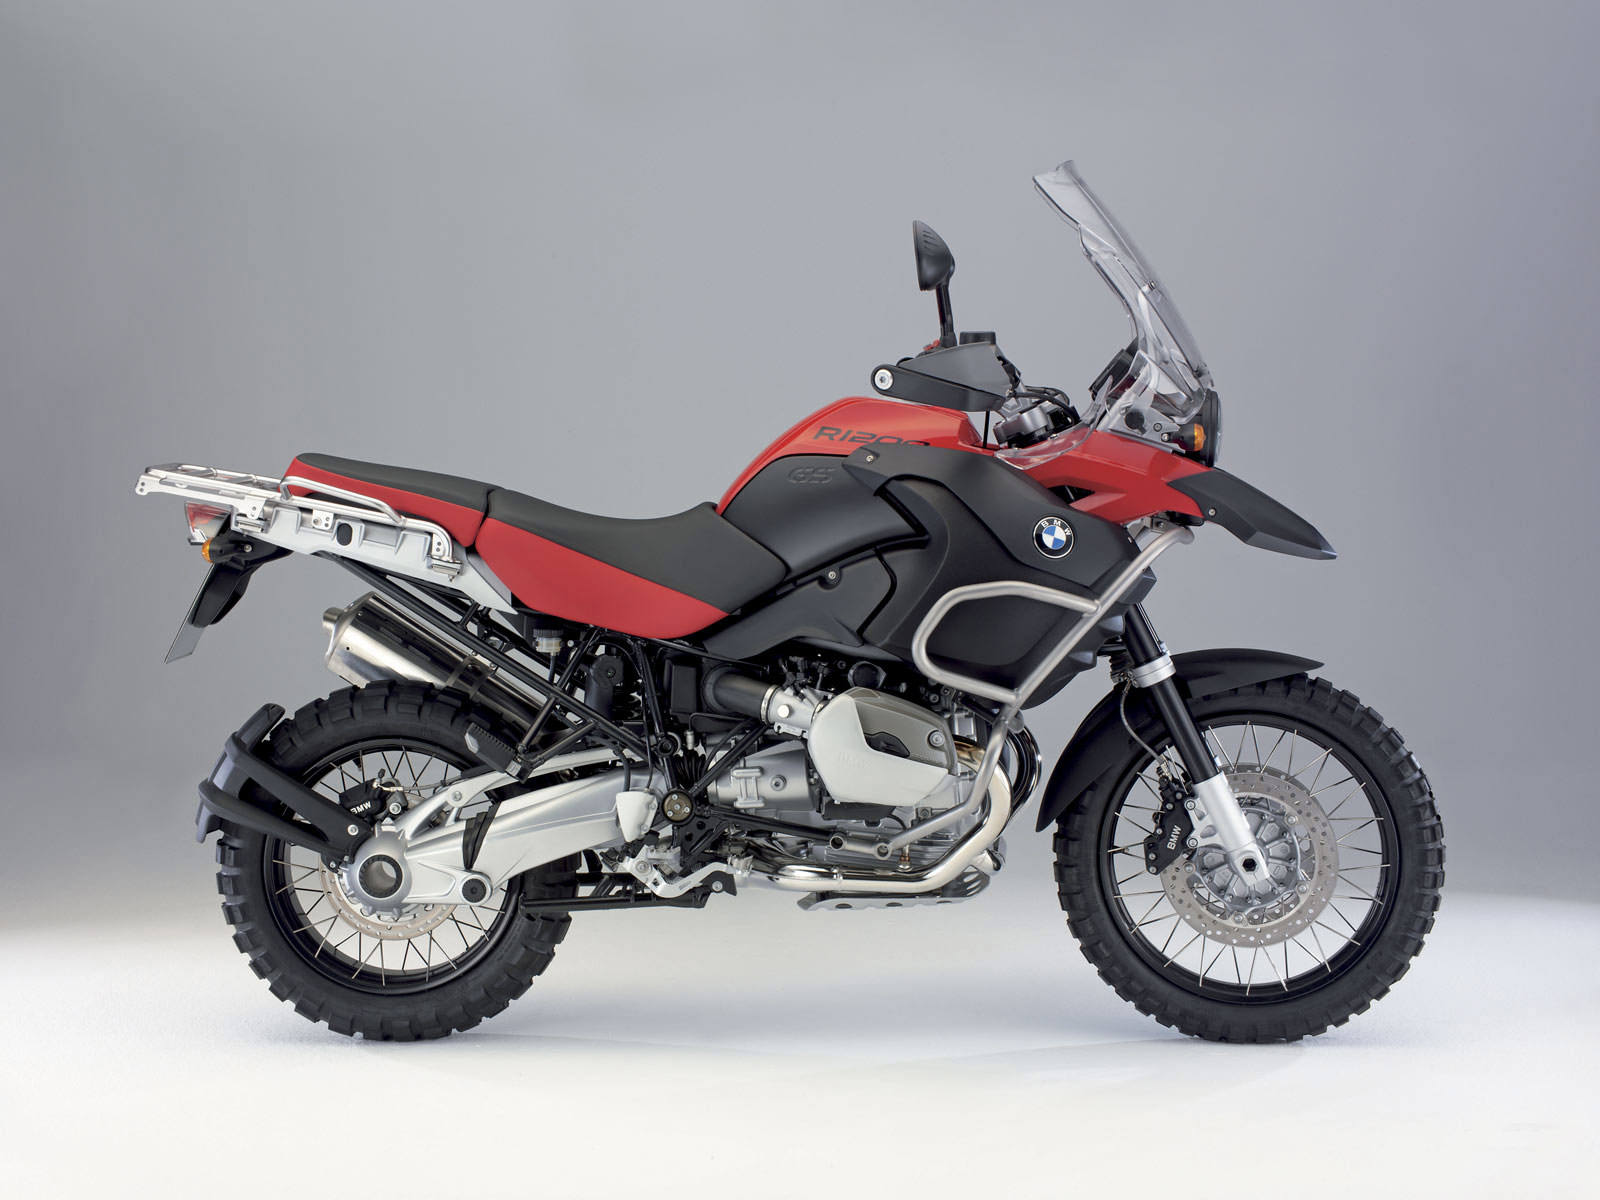 2008 BMW R 1200 GS Adventures motorcycle wallpapers